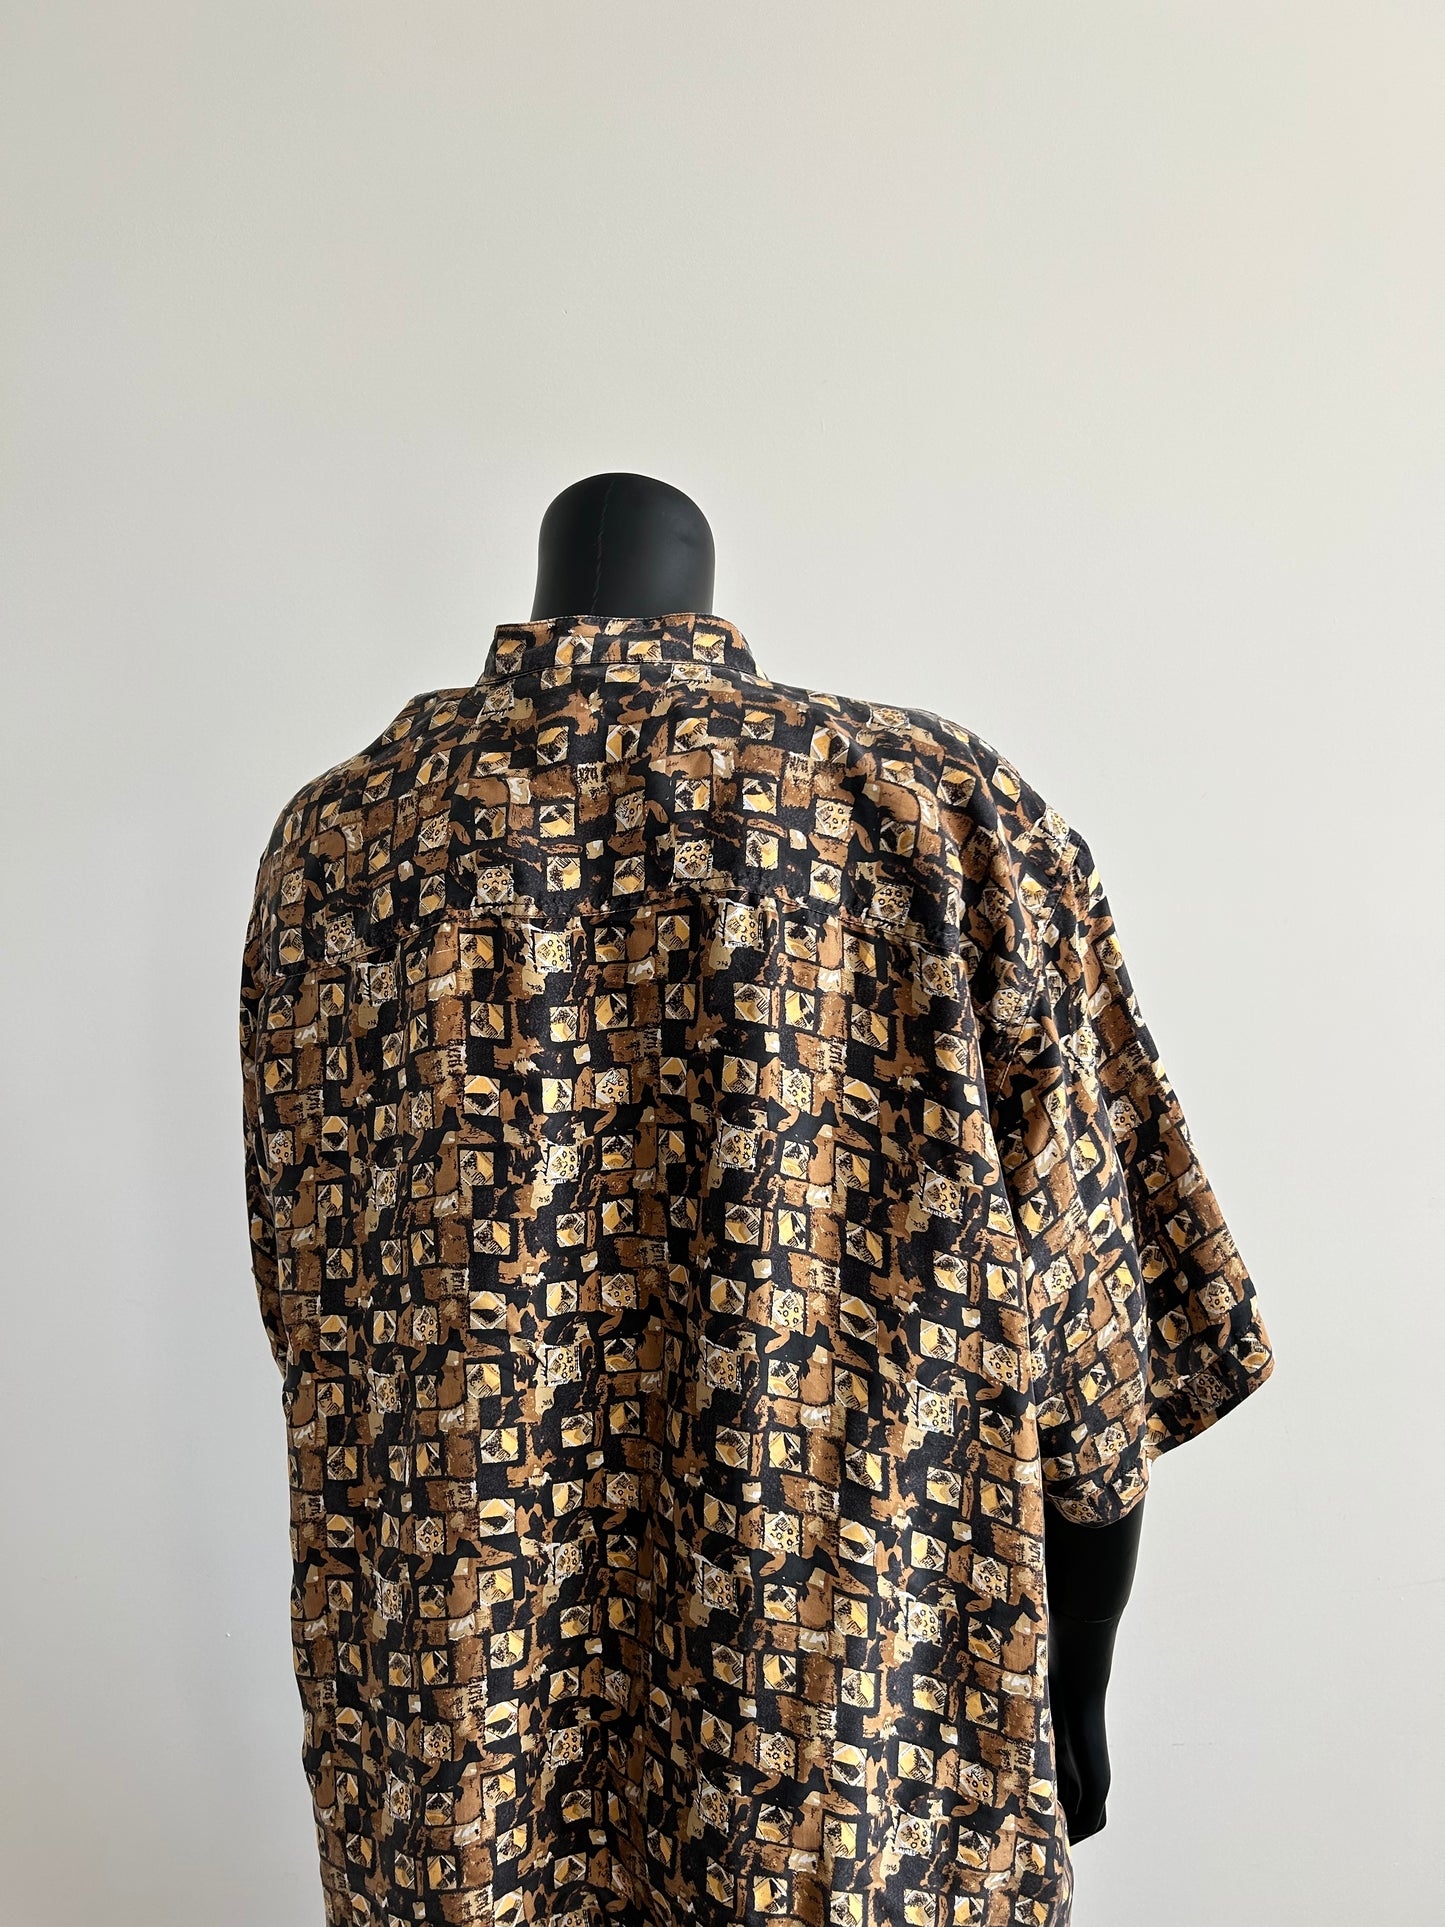 Vintage Personal Choice Button Up